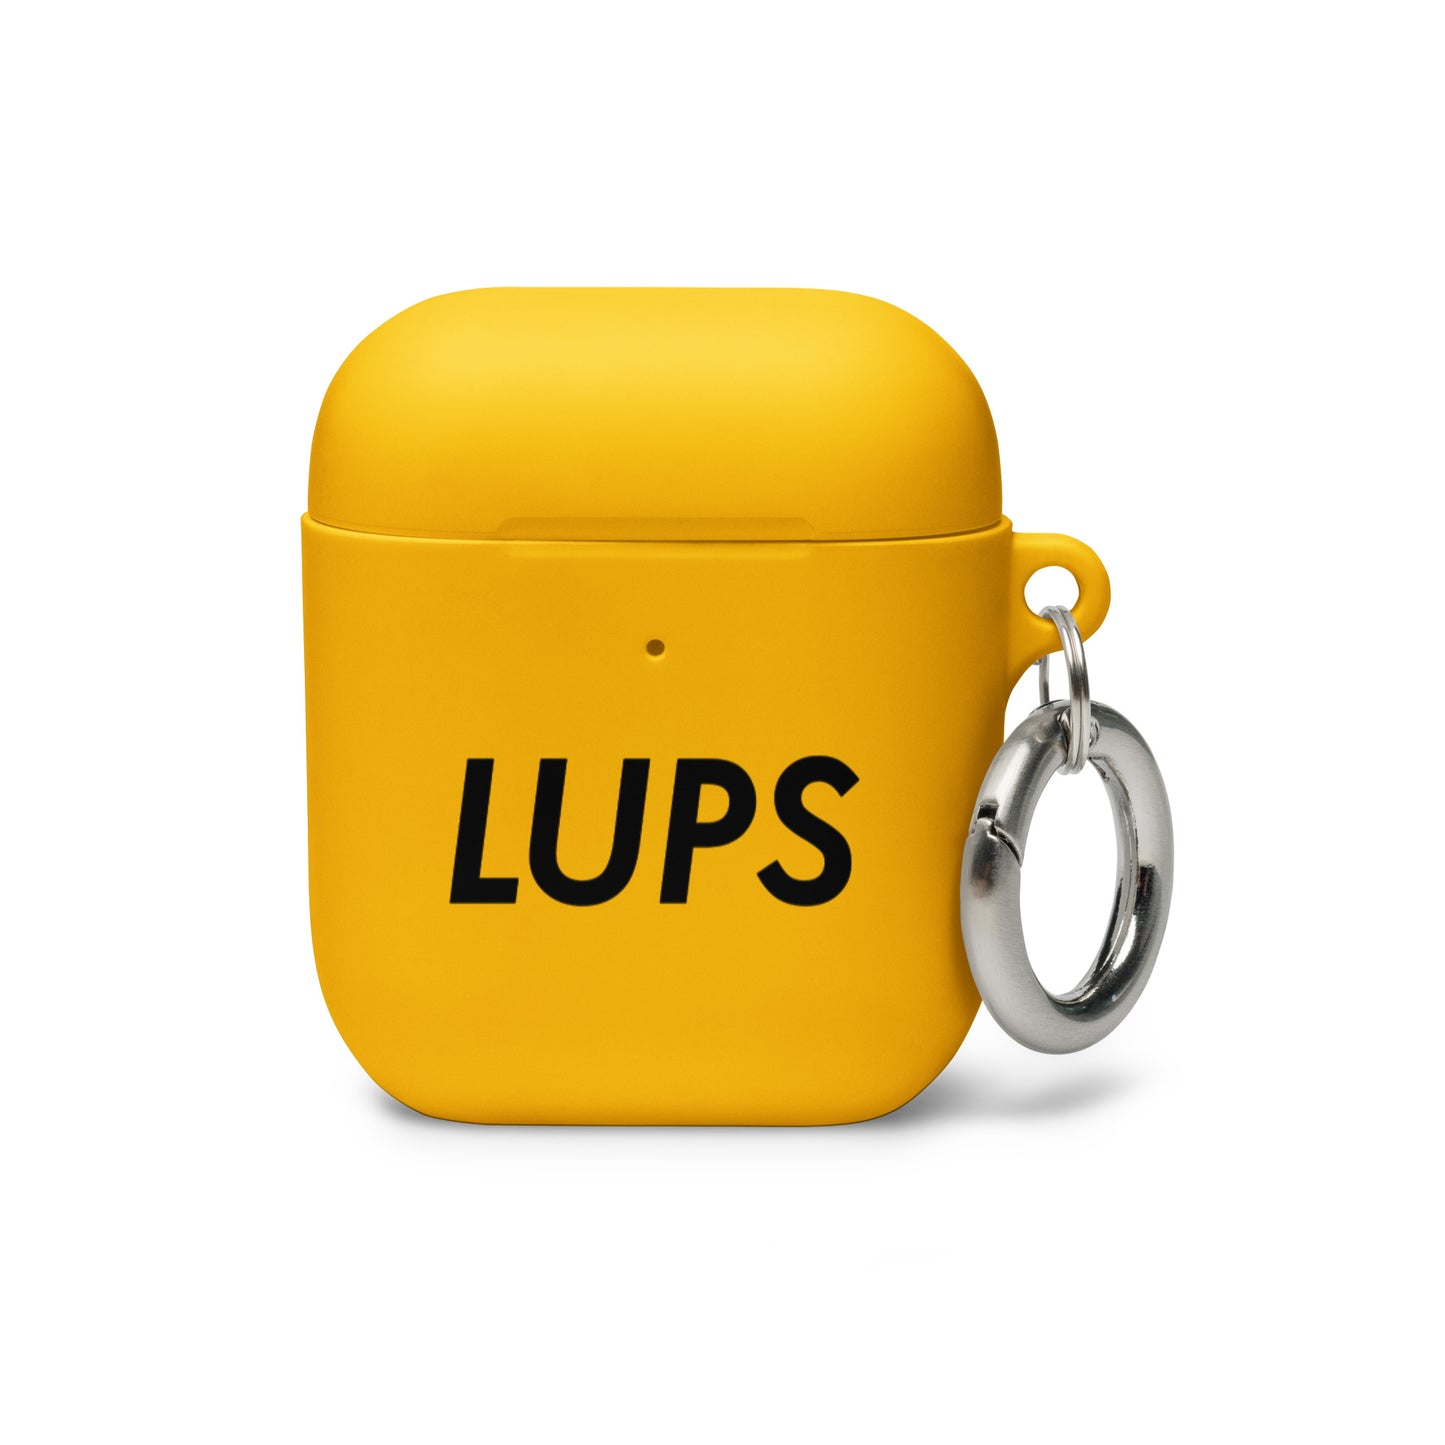 Lups Airpods Case